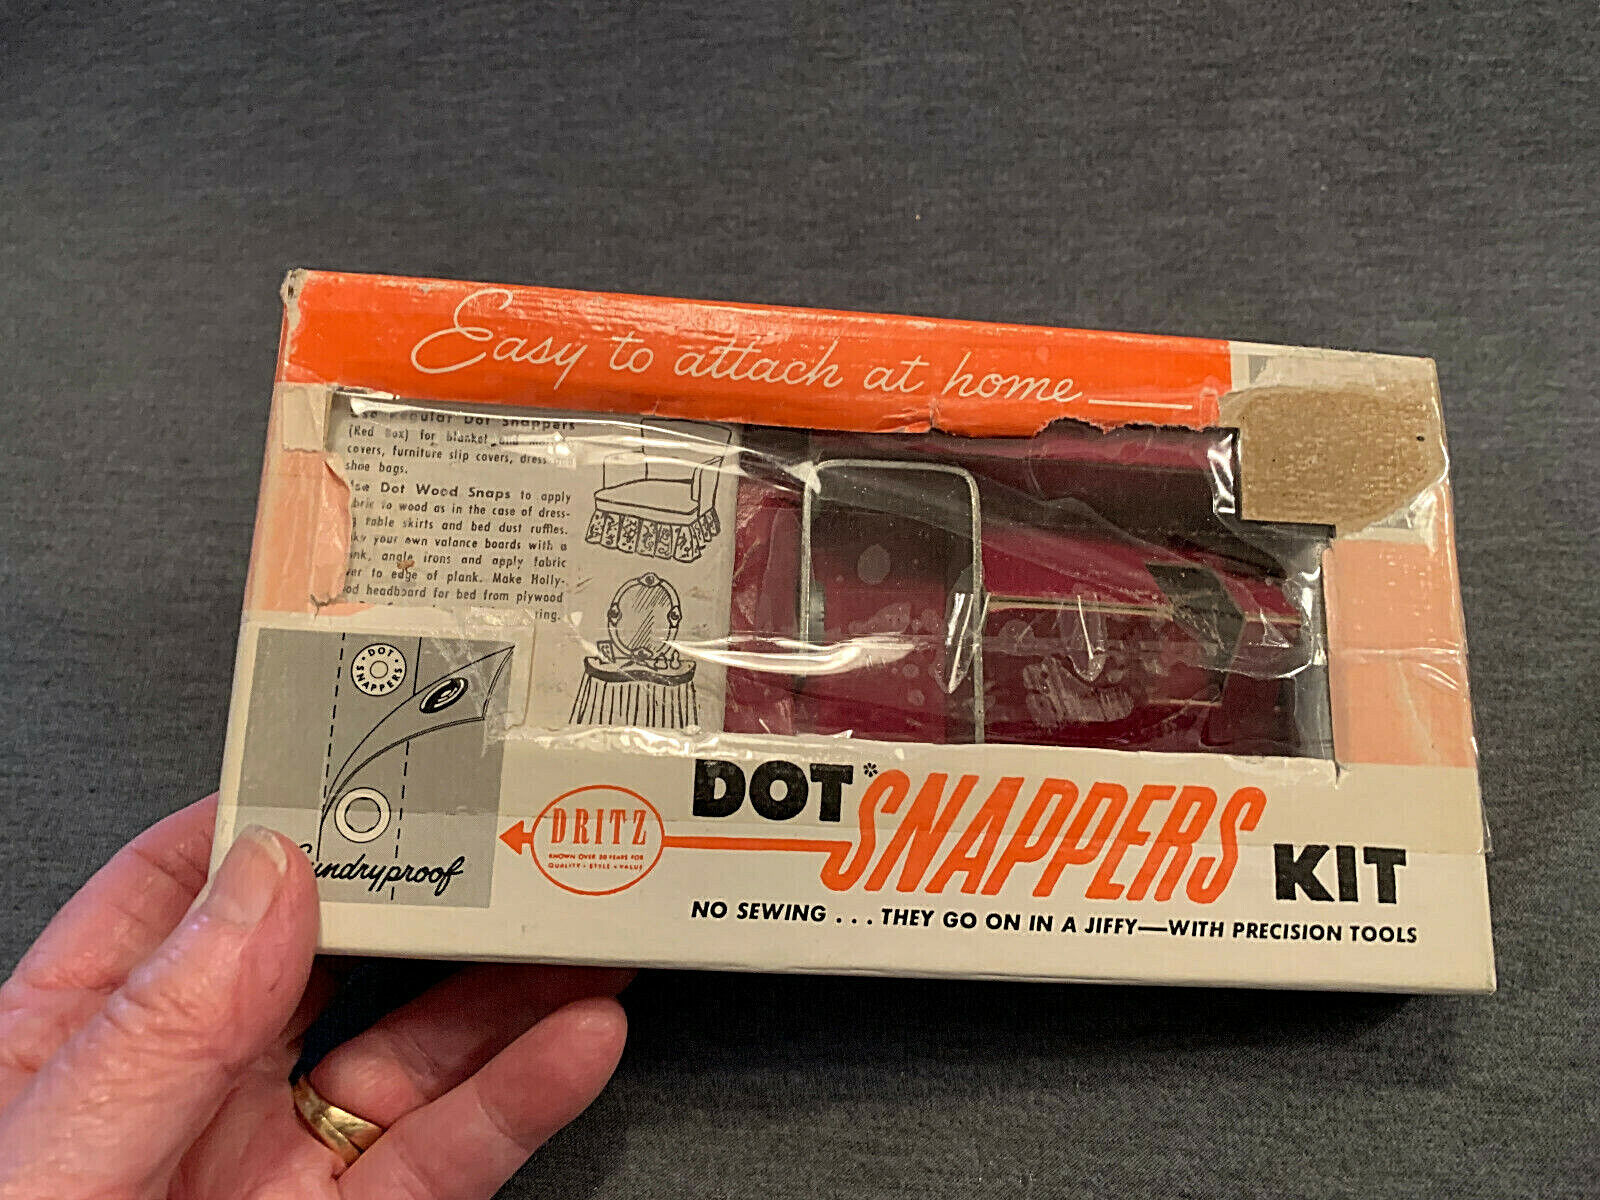 Vintage Dritz Dot Snapper Kit For Applying Dot Snaps To Clothing & Accessories!